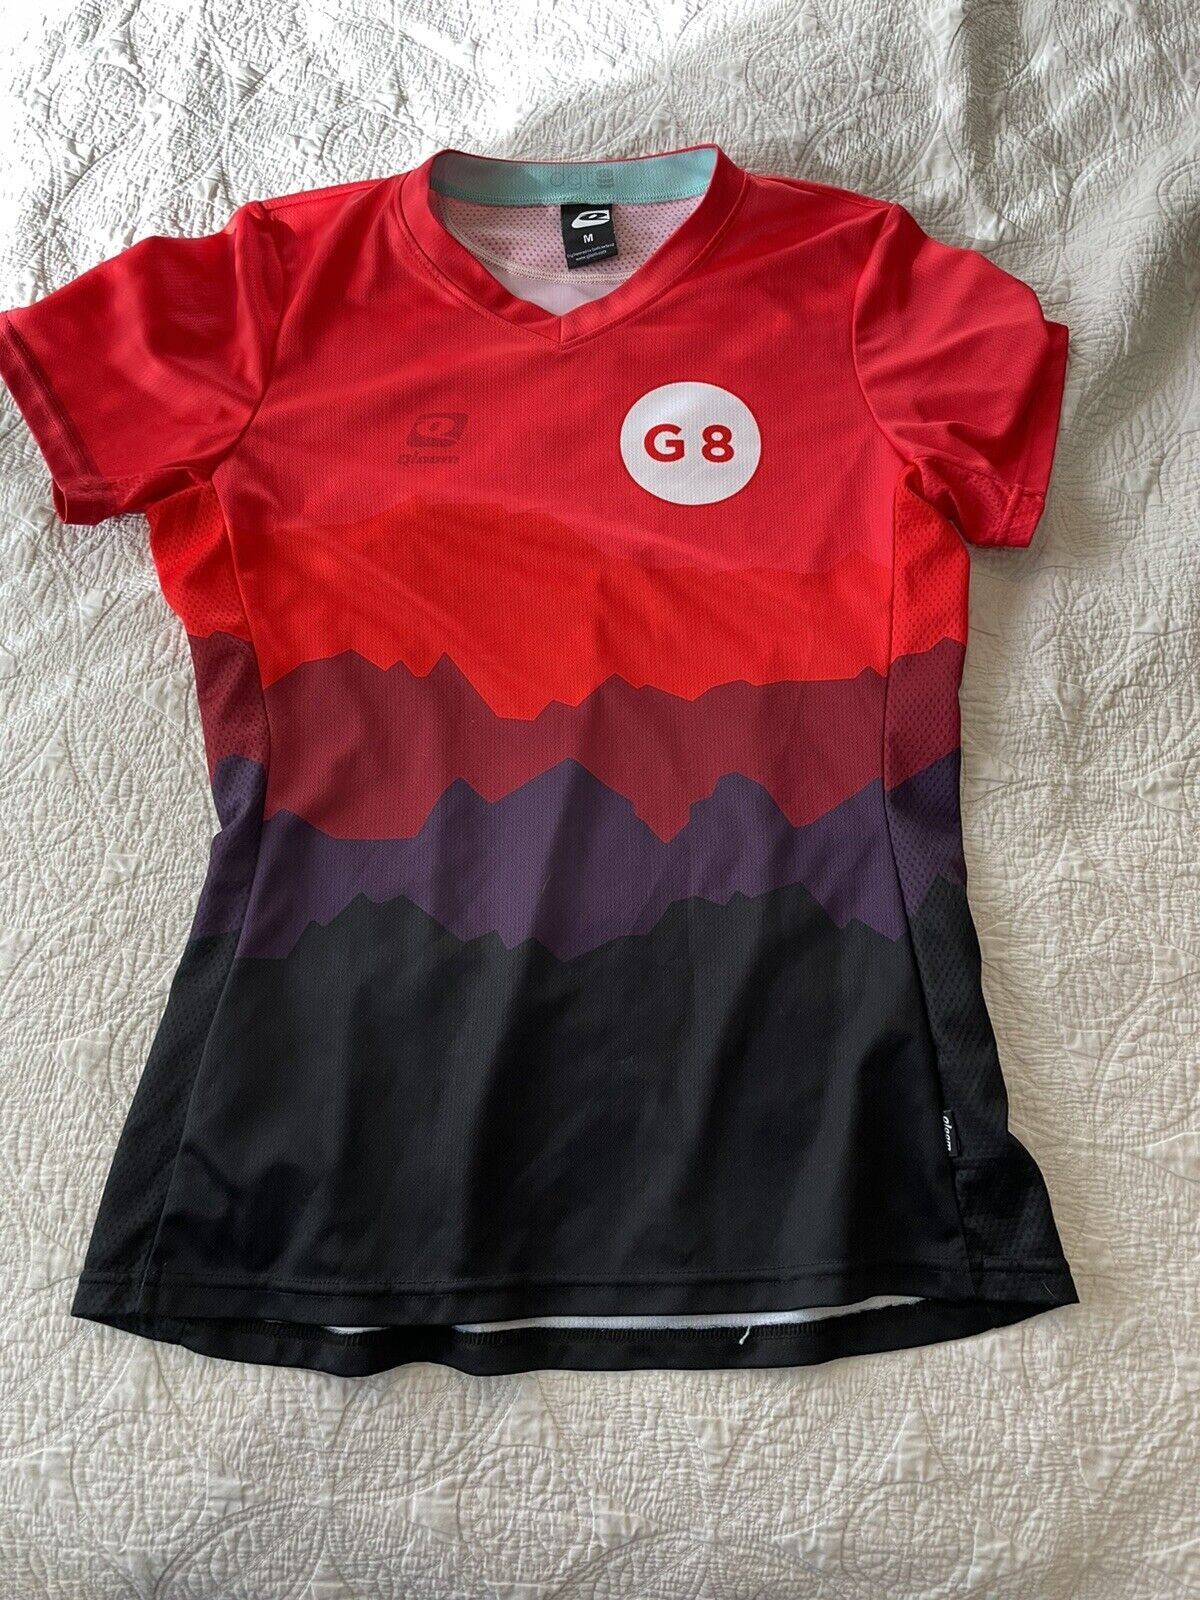 New popularity Qloom Cycling Jersey Sale item Medium M Black and Red